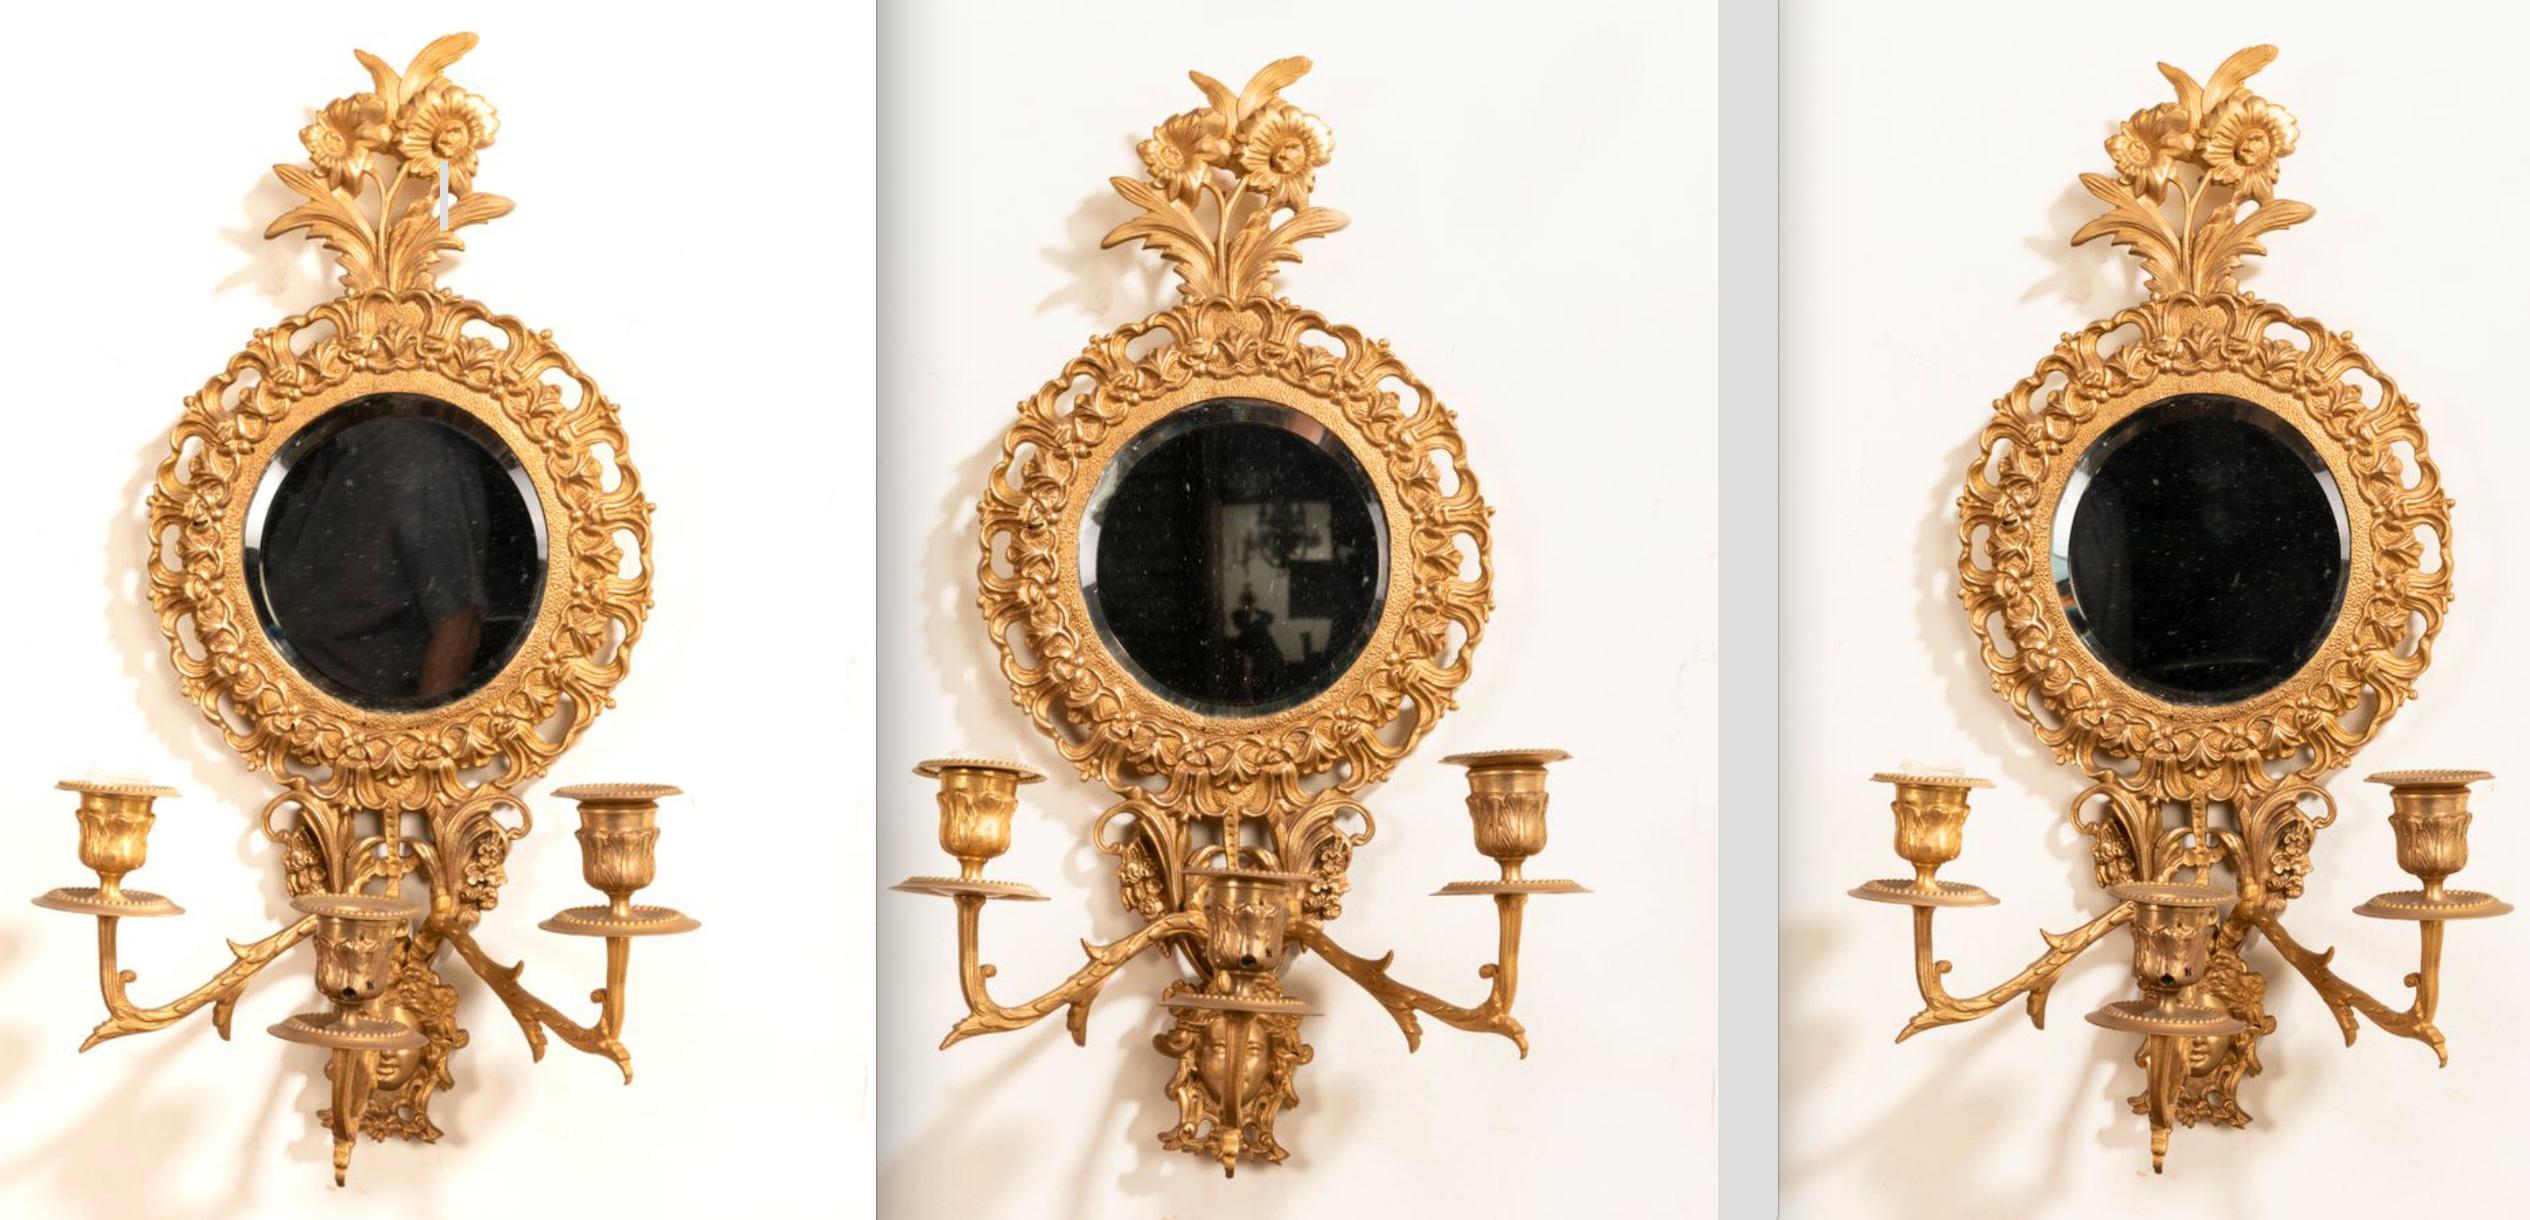 19th century pair of gold-leaf mirrored two-light sconces, with original mirror glass. 
Sconces can be wired,
France, circa 1880.